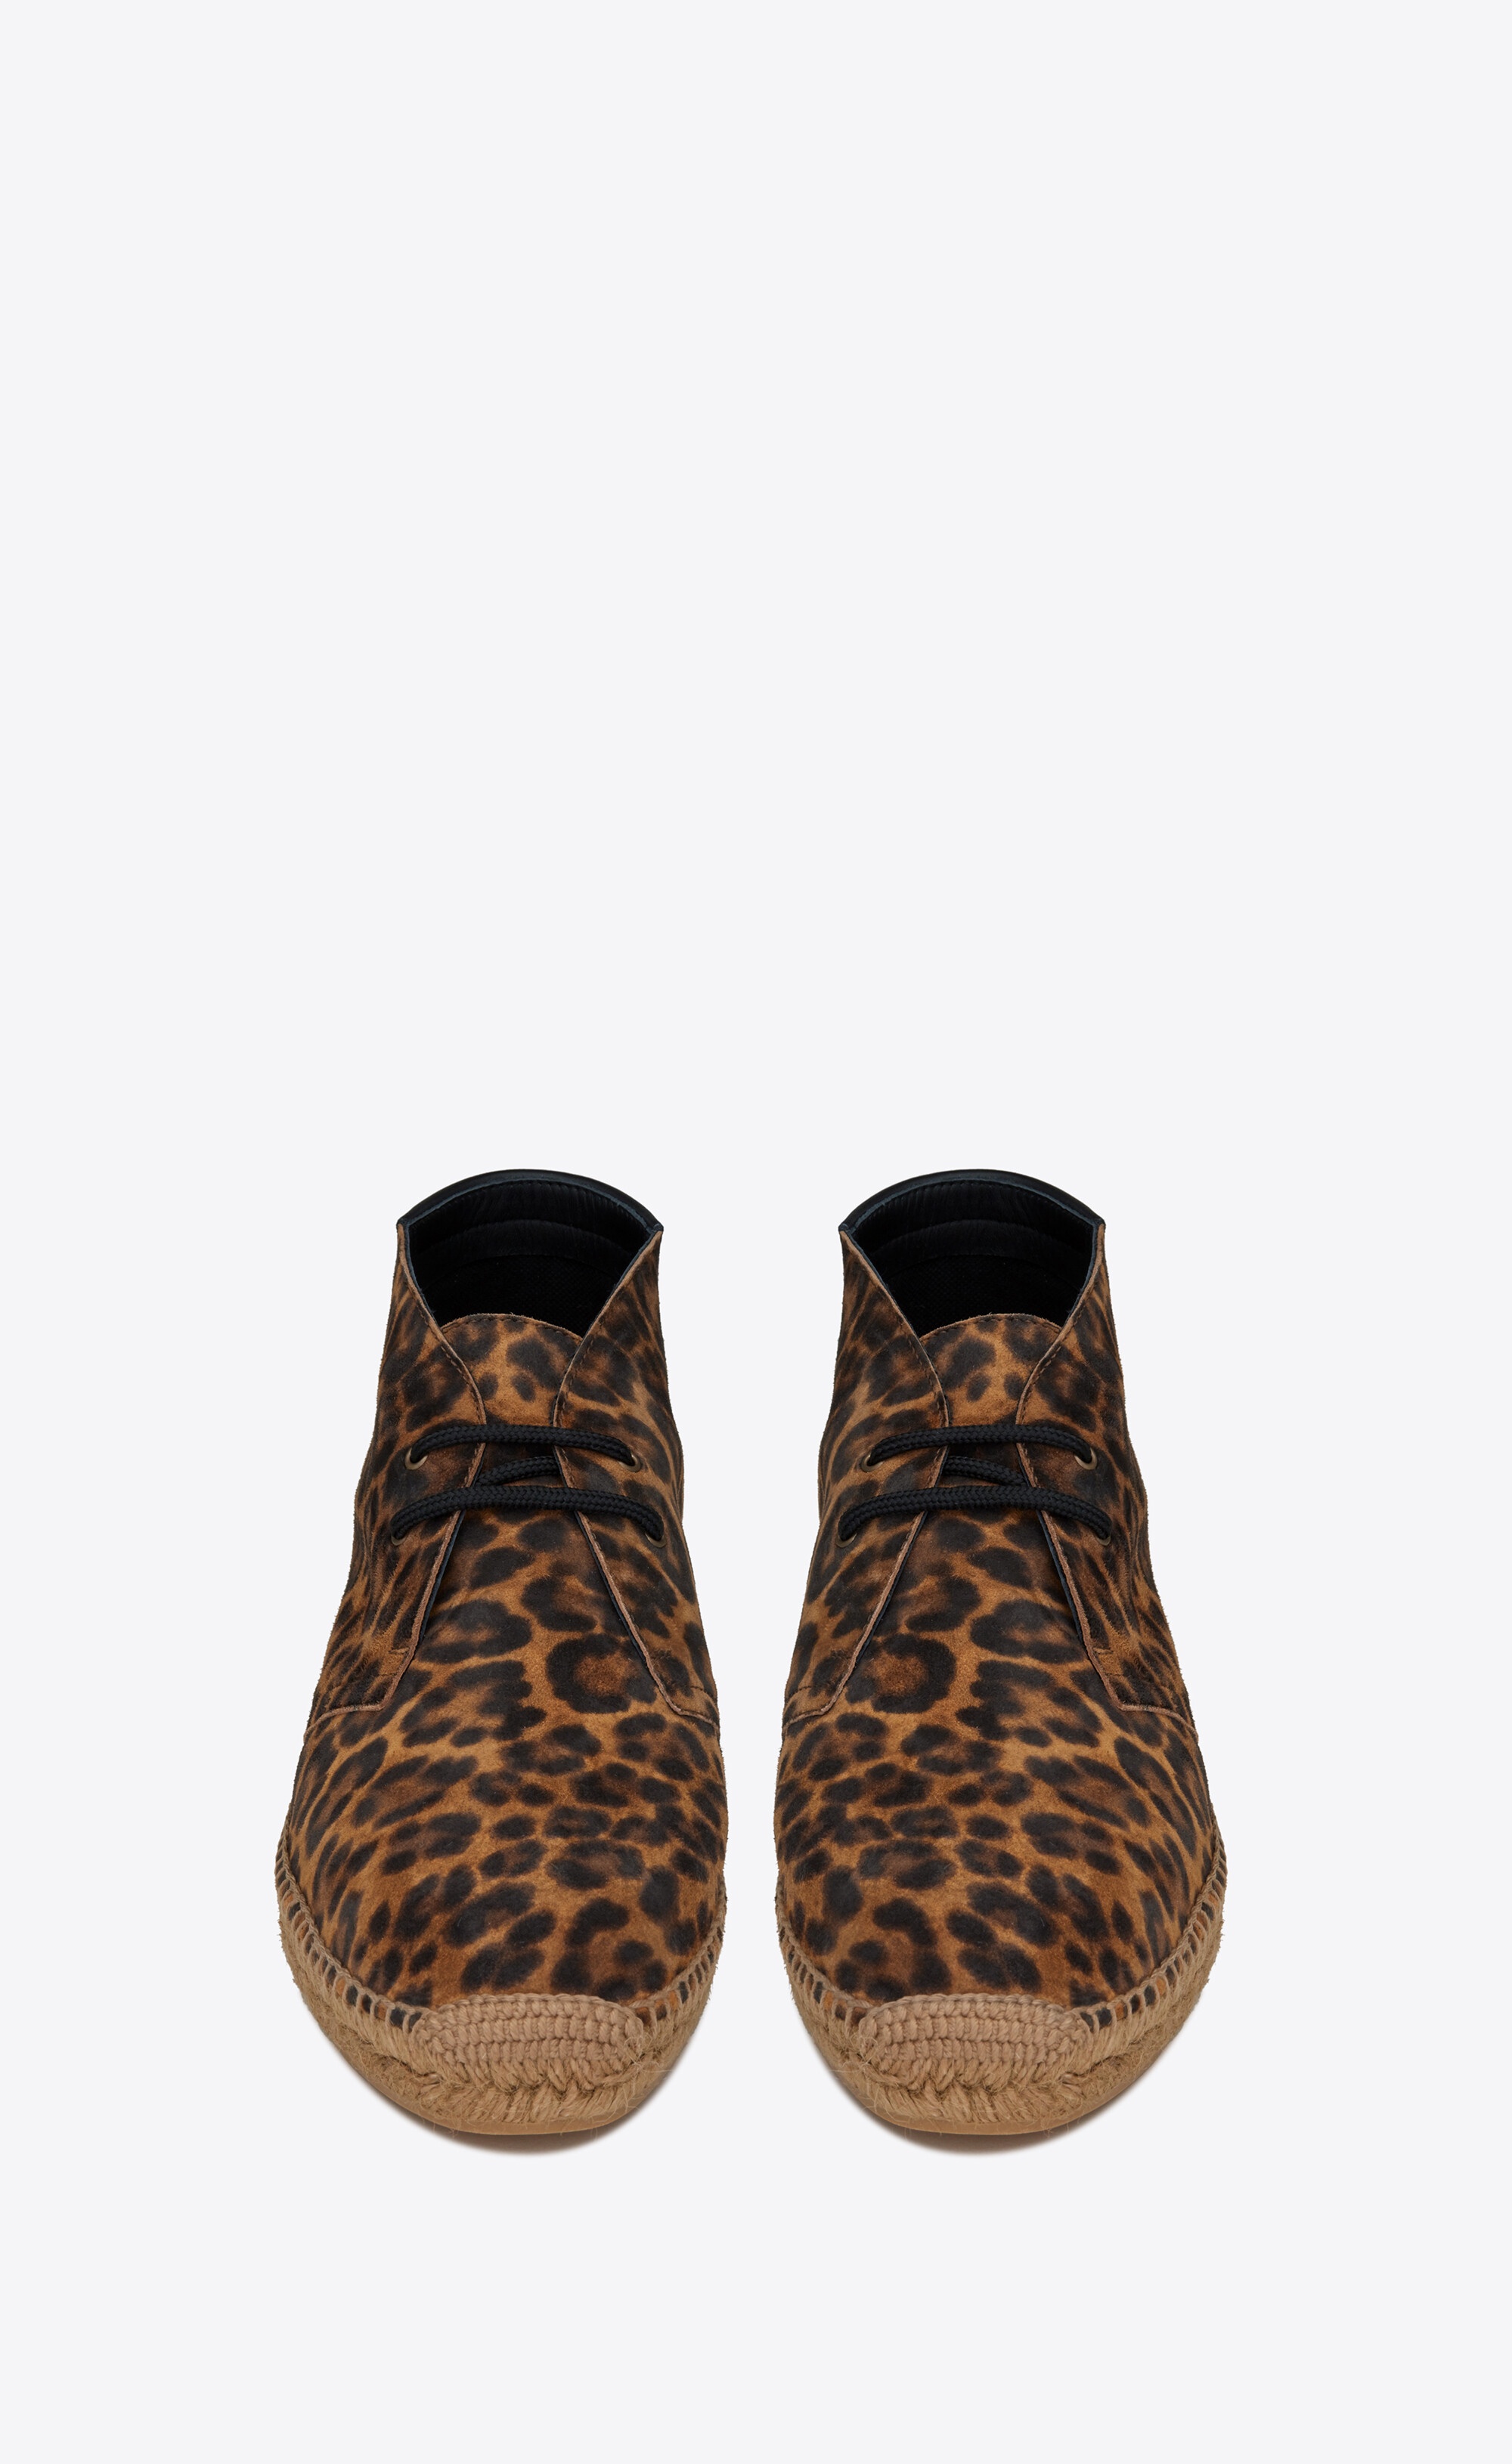 laced espadrilles in leopard-print suede - 2